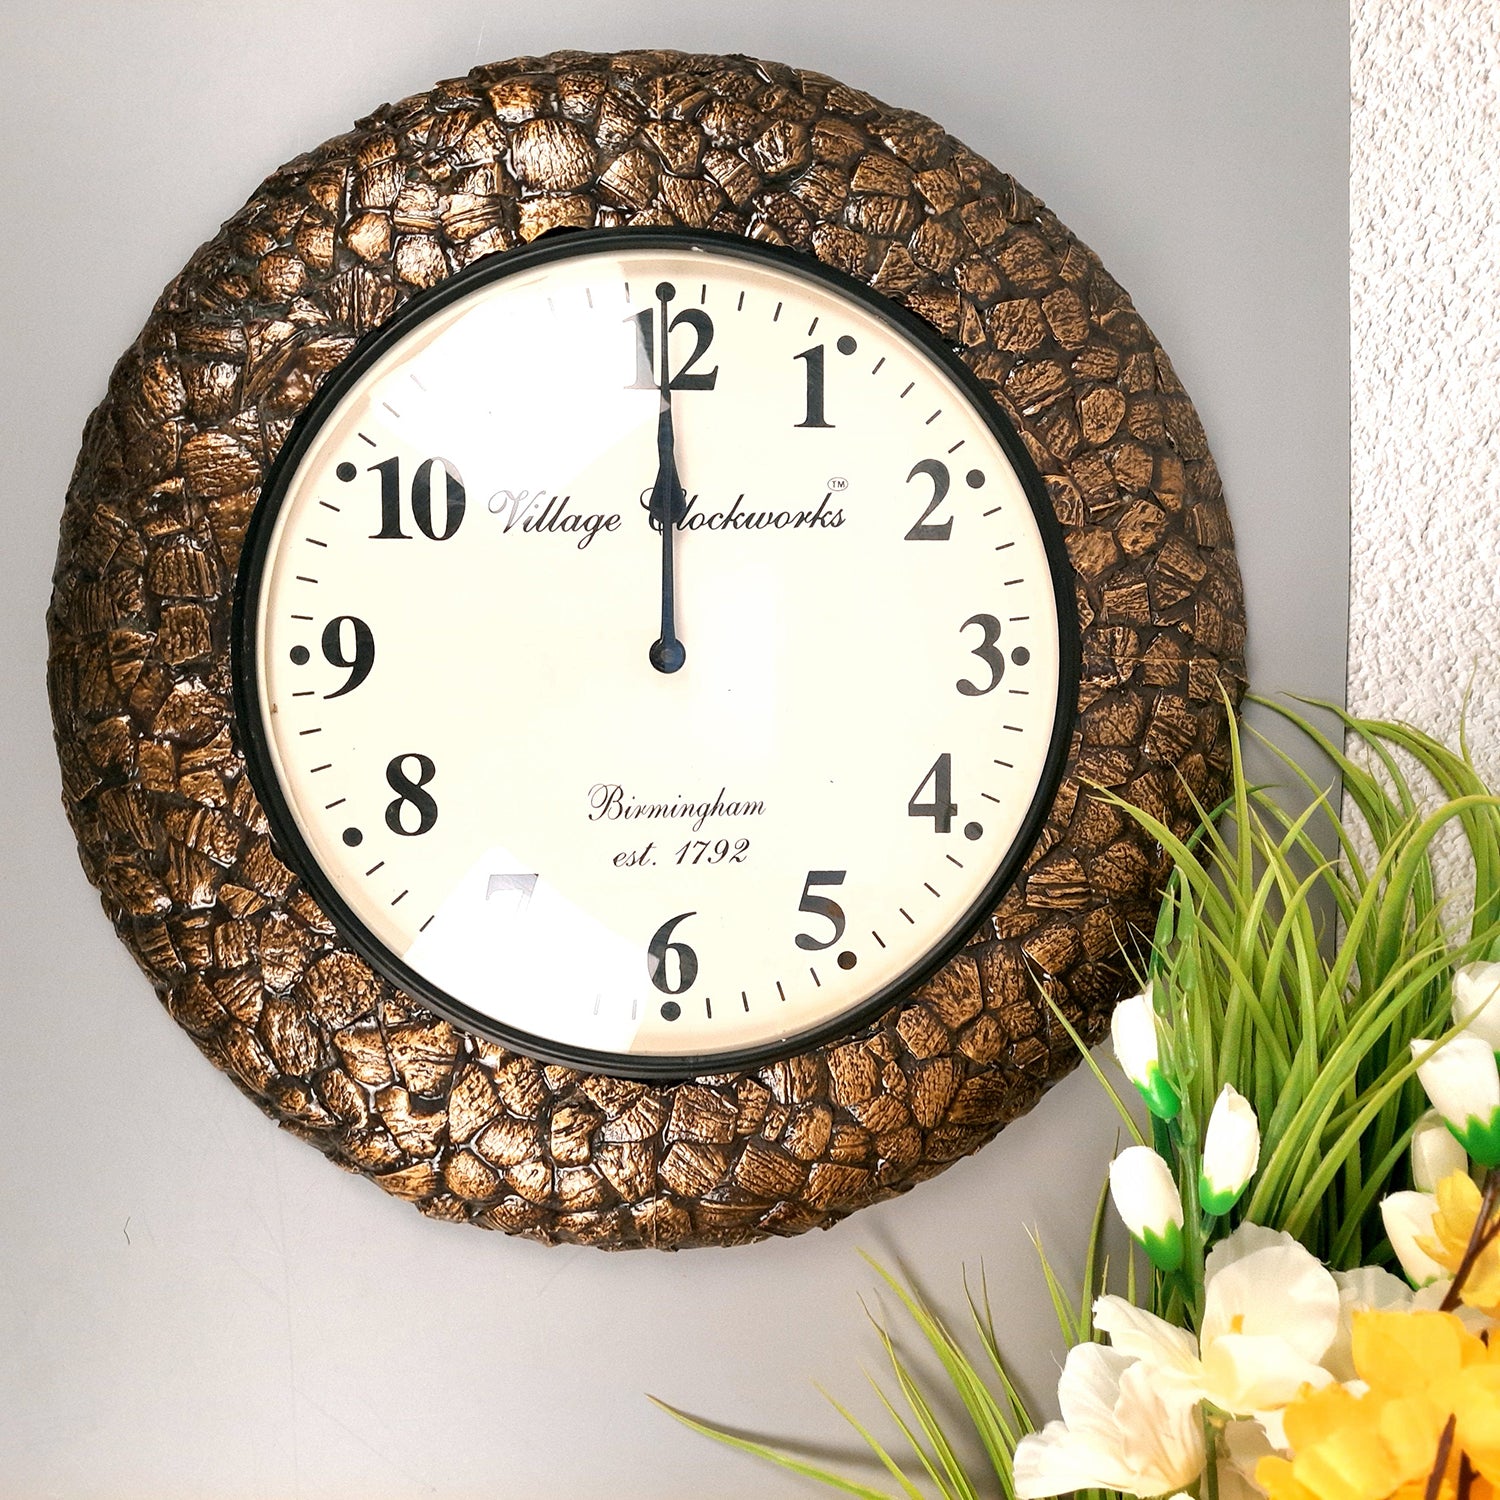 Wall Clock for Home | Wall Mount Analog Big Watch With Antique Brass Work - For Living Room, Bedroom, Hall, Office Decor & Gift  - Apkamart